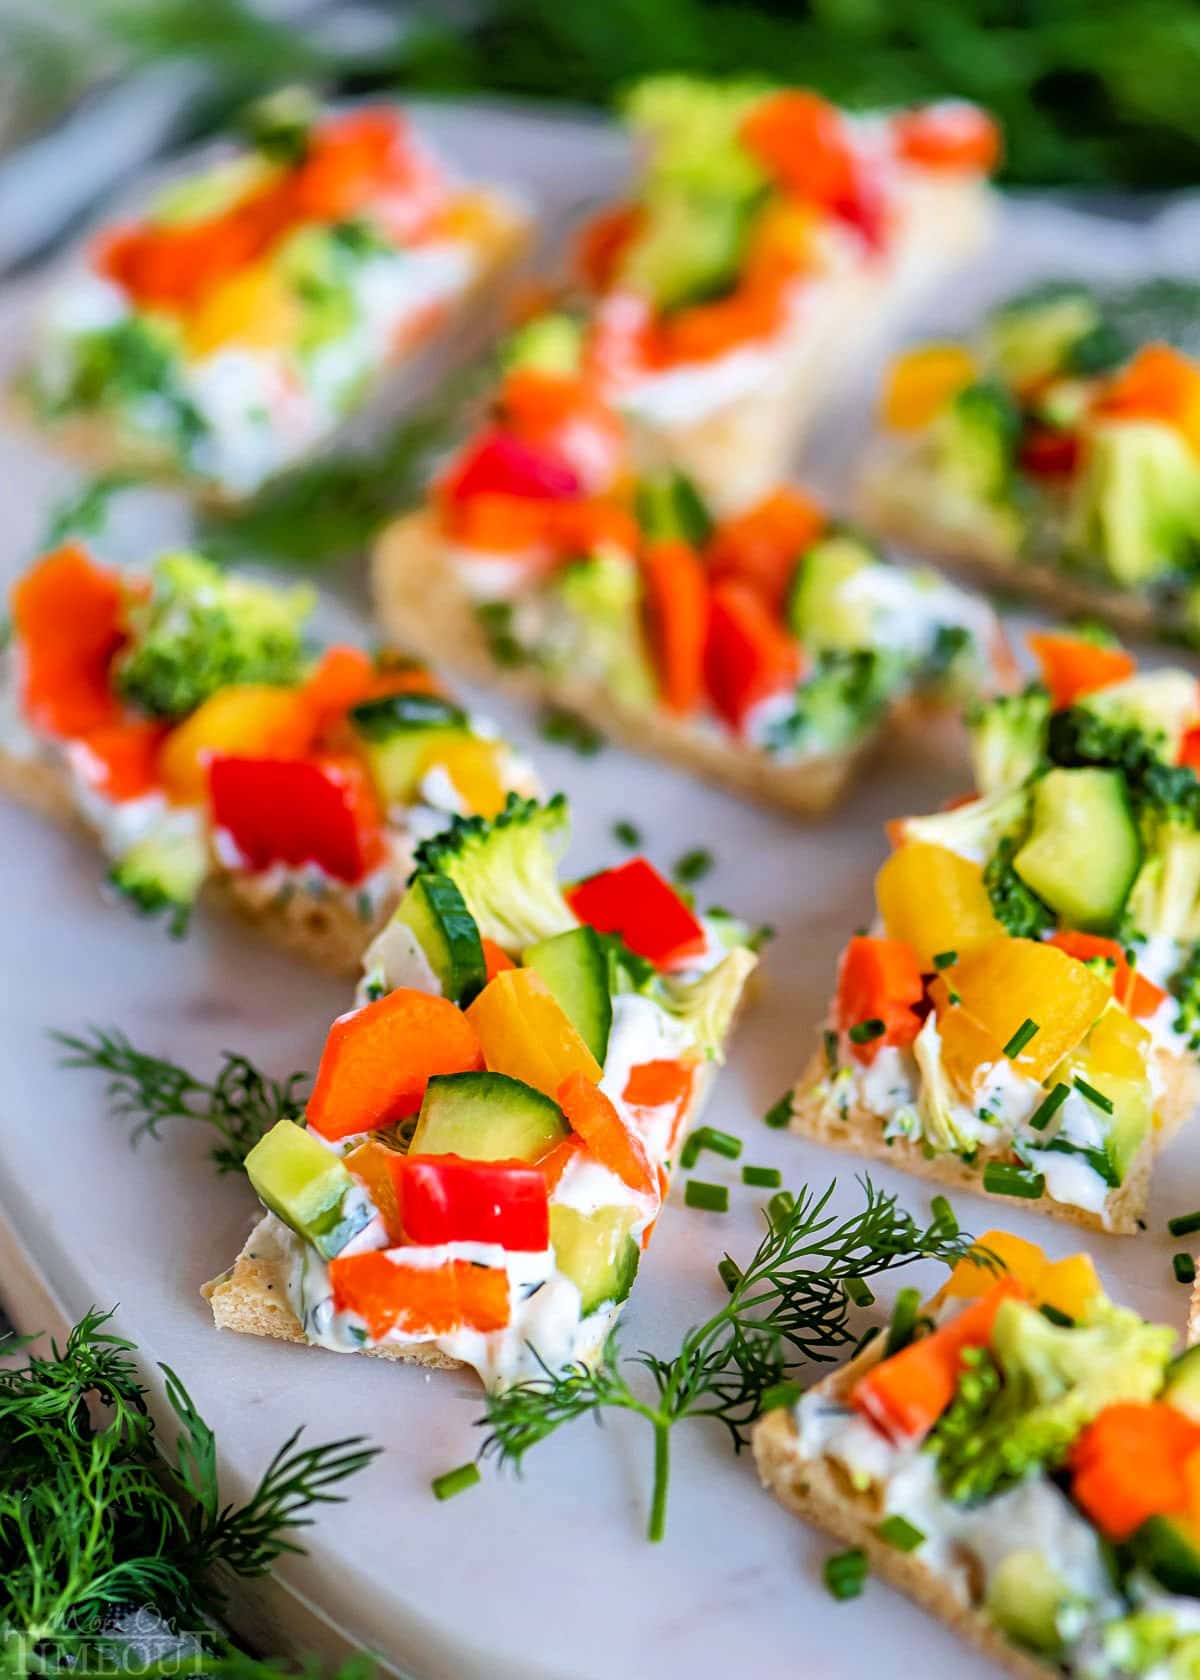 veggie pizza cut into rectangles sitting on marble board garnished with fresh sprigs of dill.